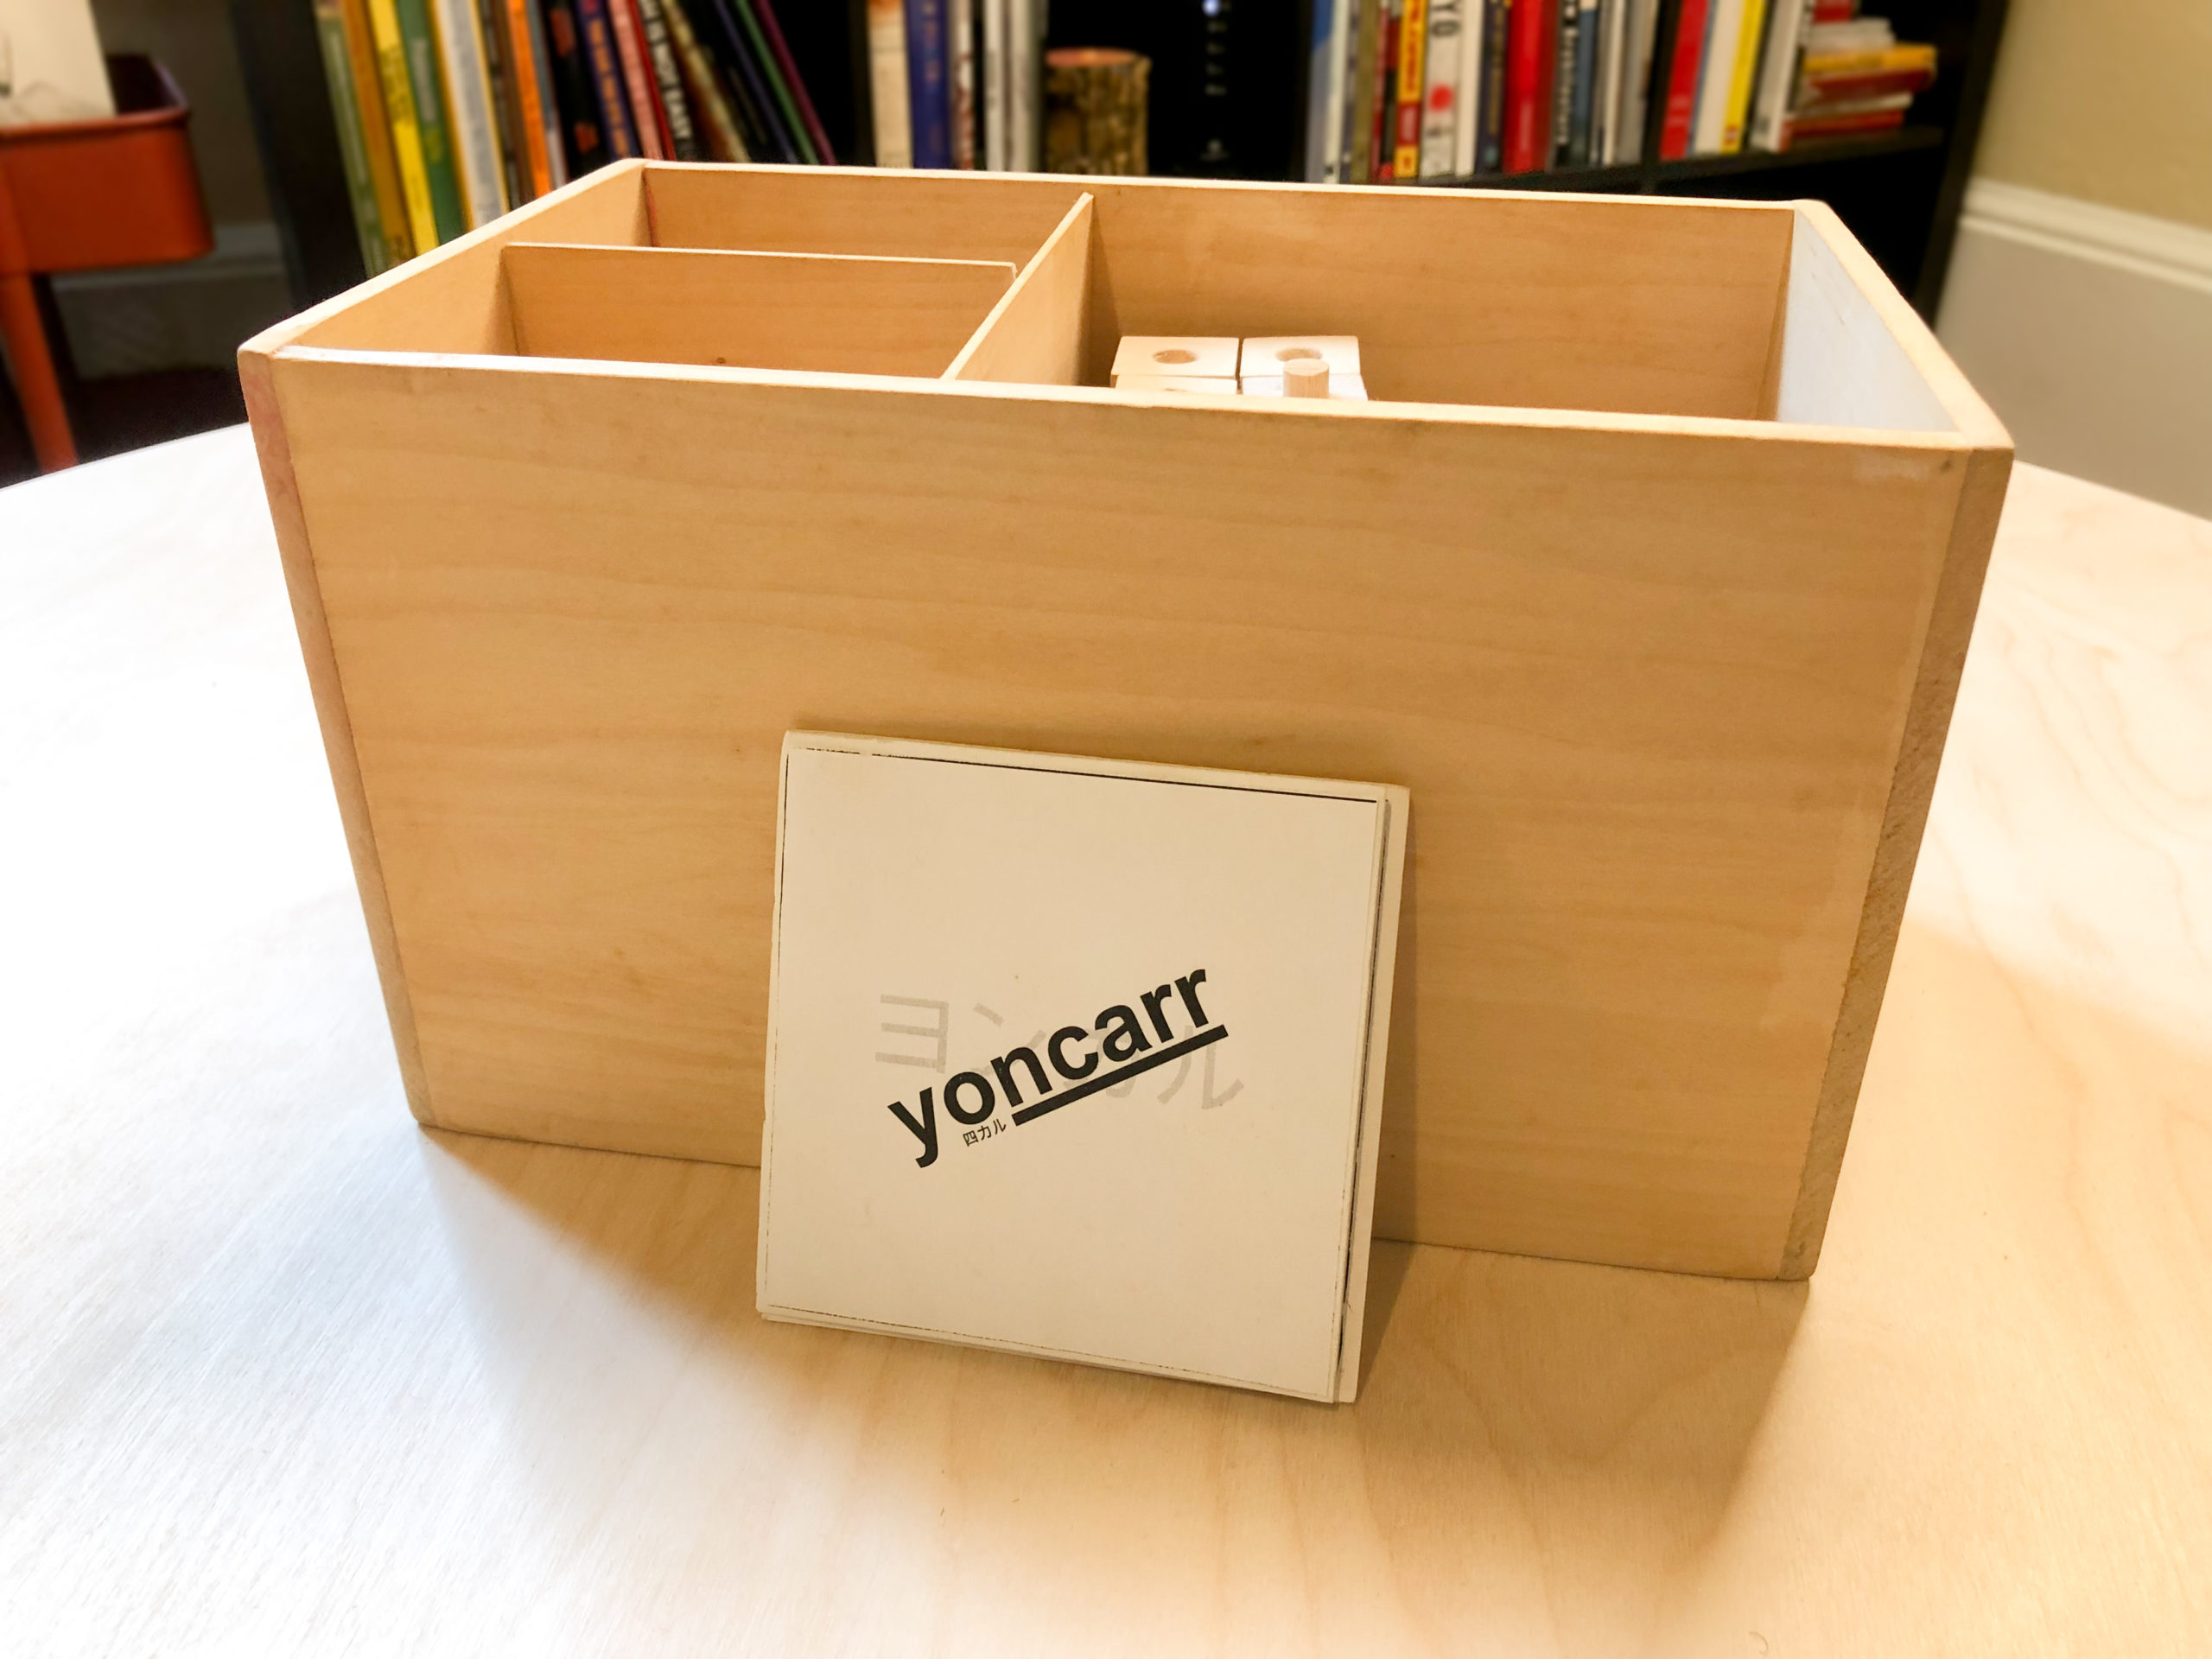 yoncarr toy box and booklet